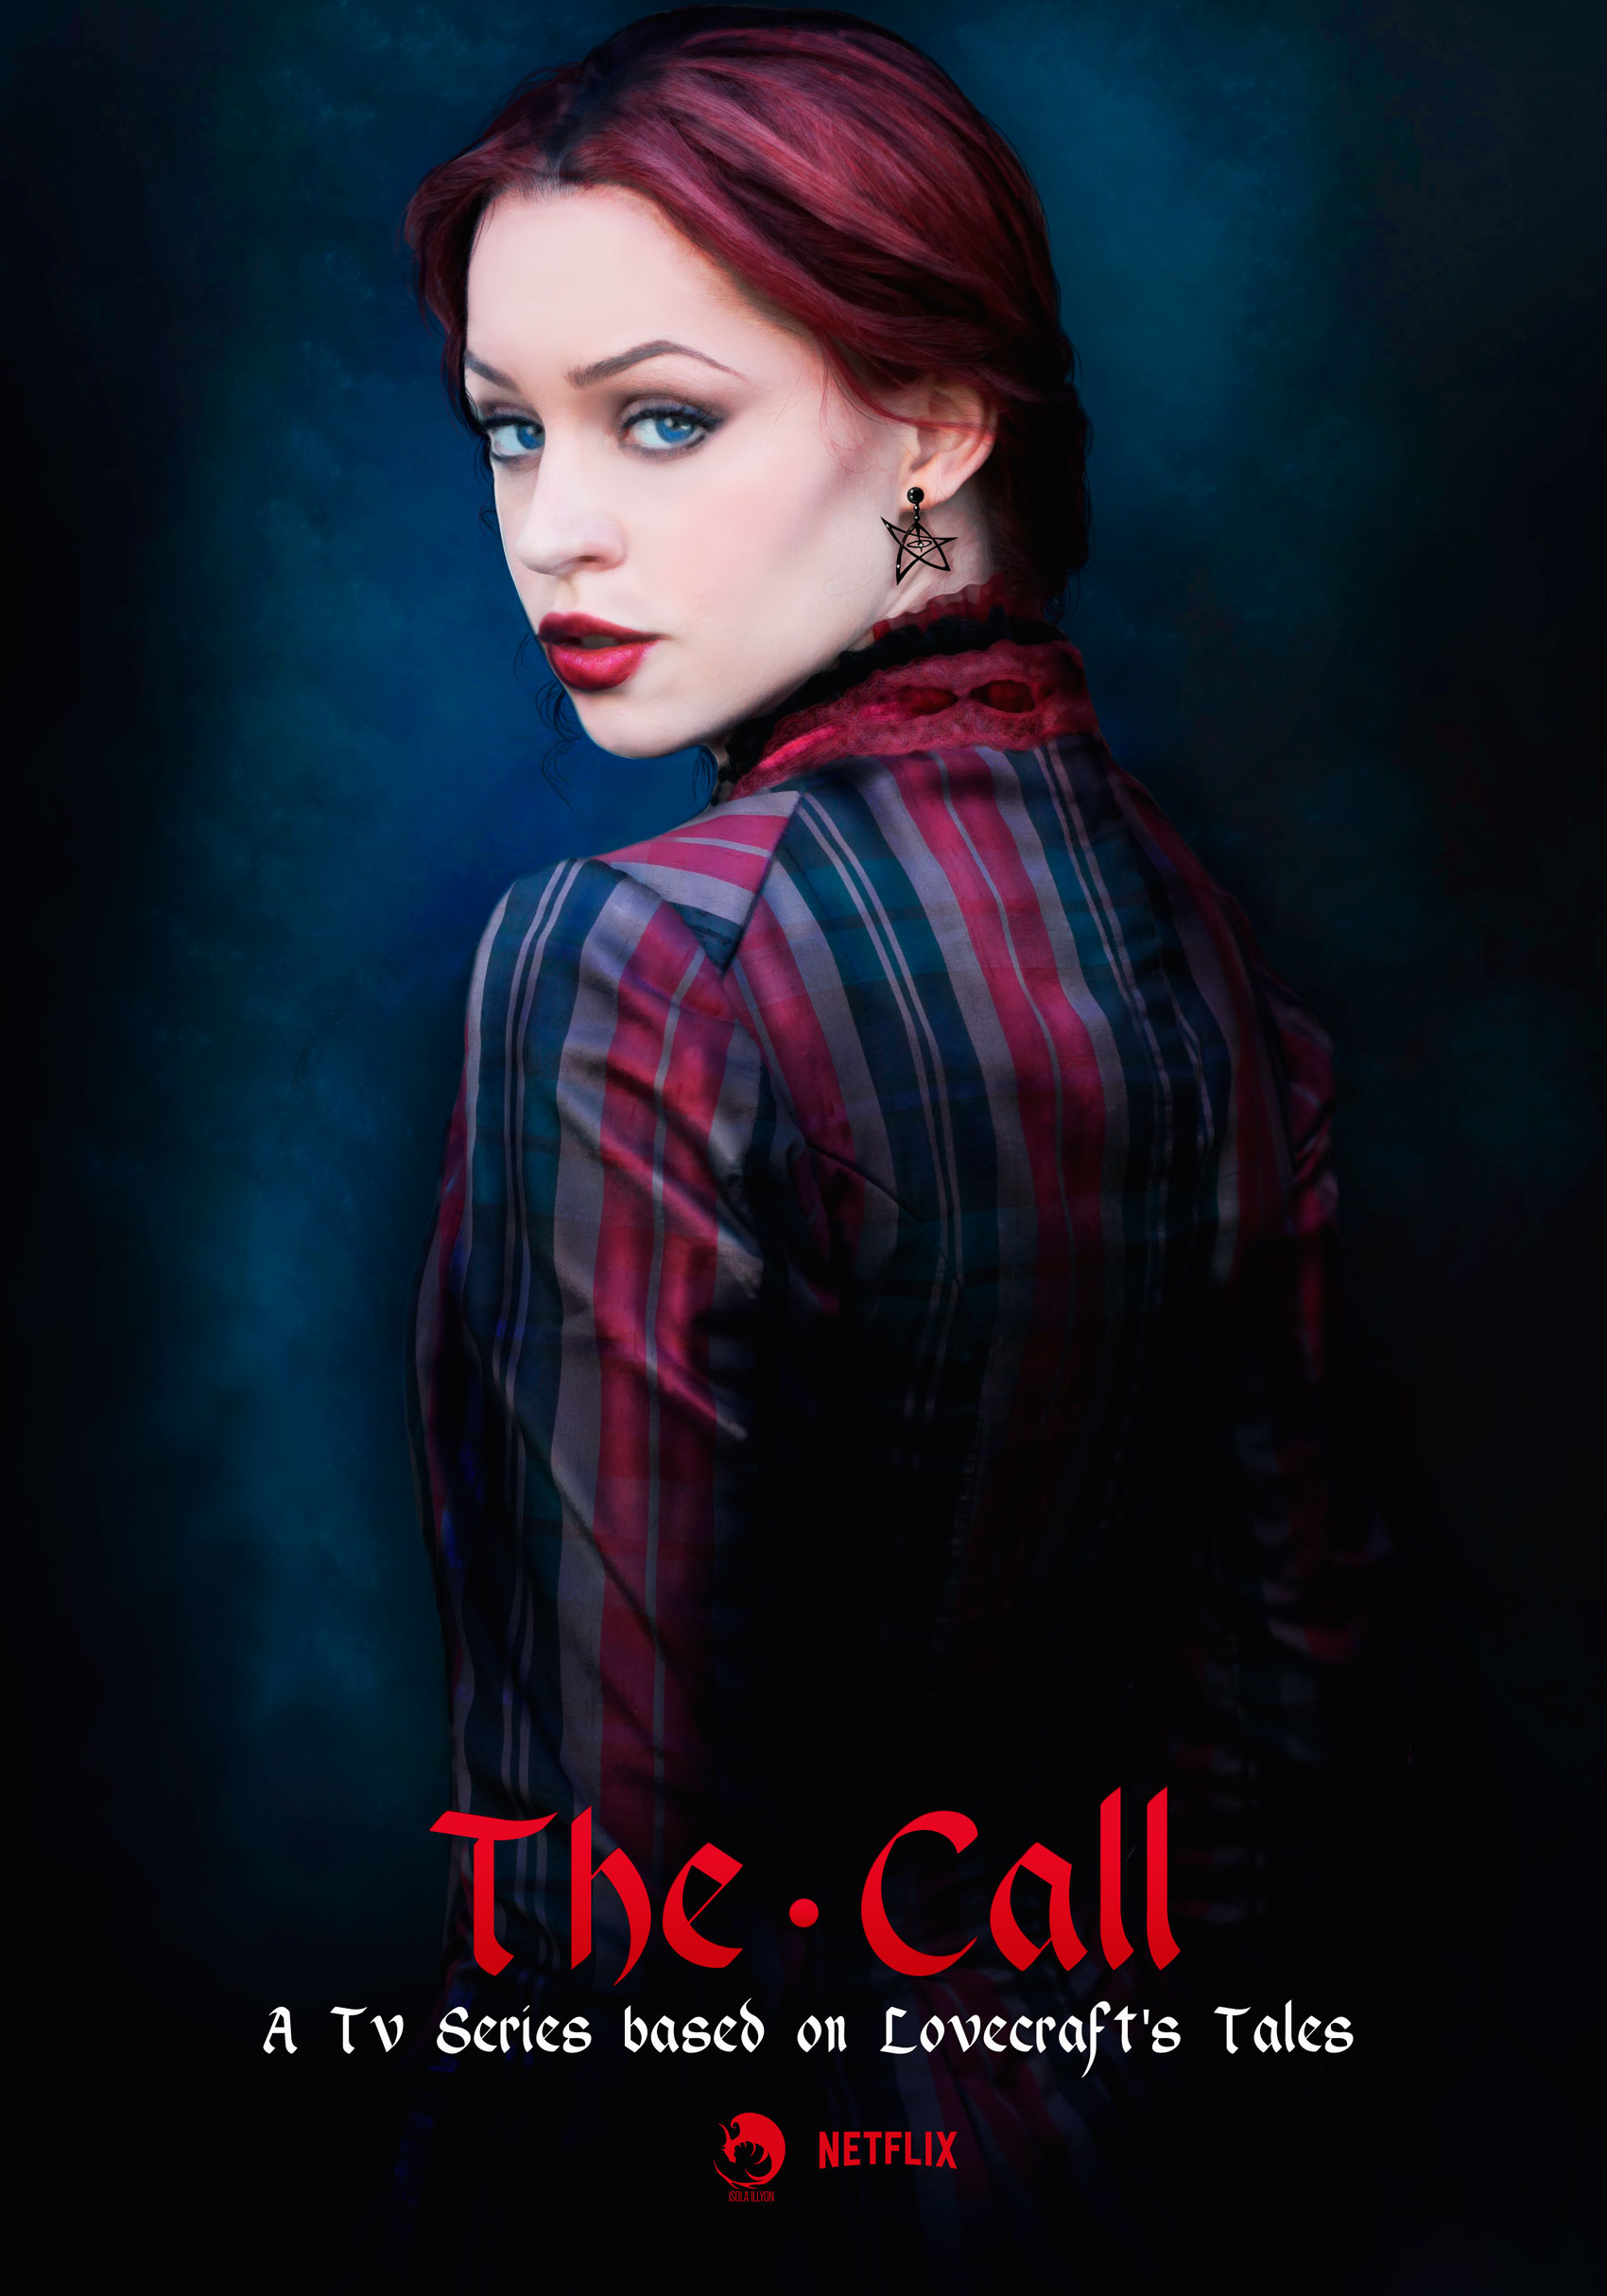 Poster-The-Call-A-Netflix-Tv-Series-based-on-Lovecraft's-tales